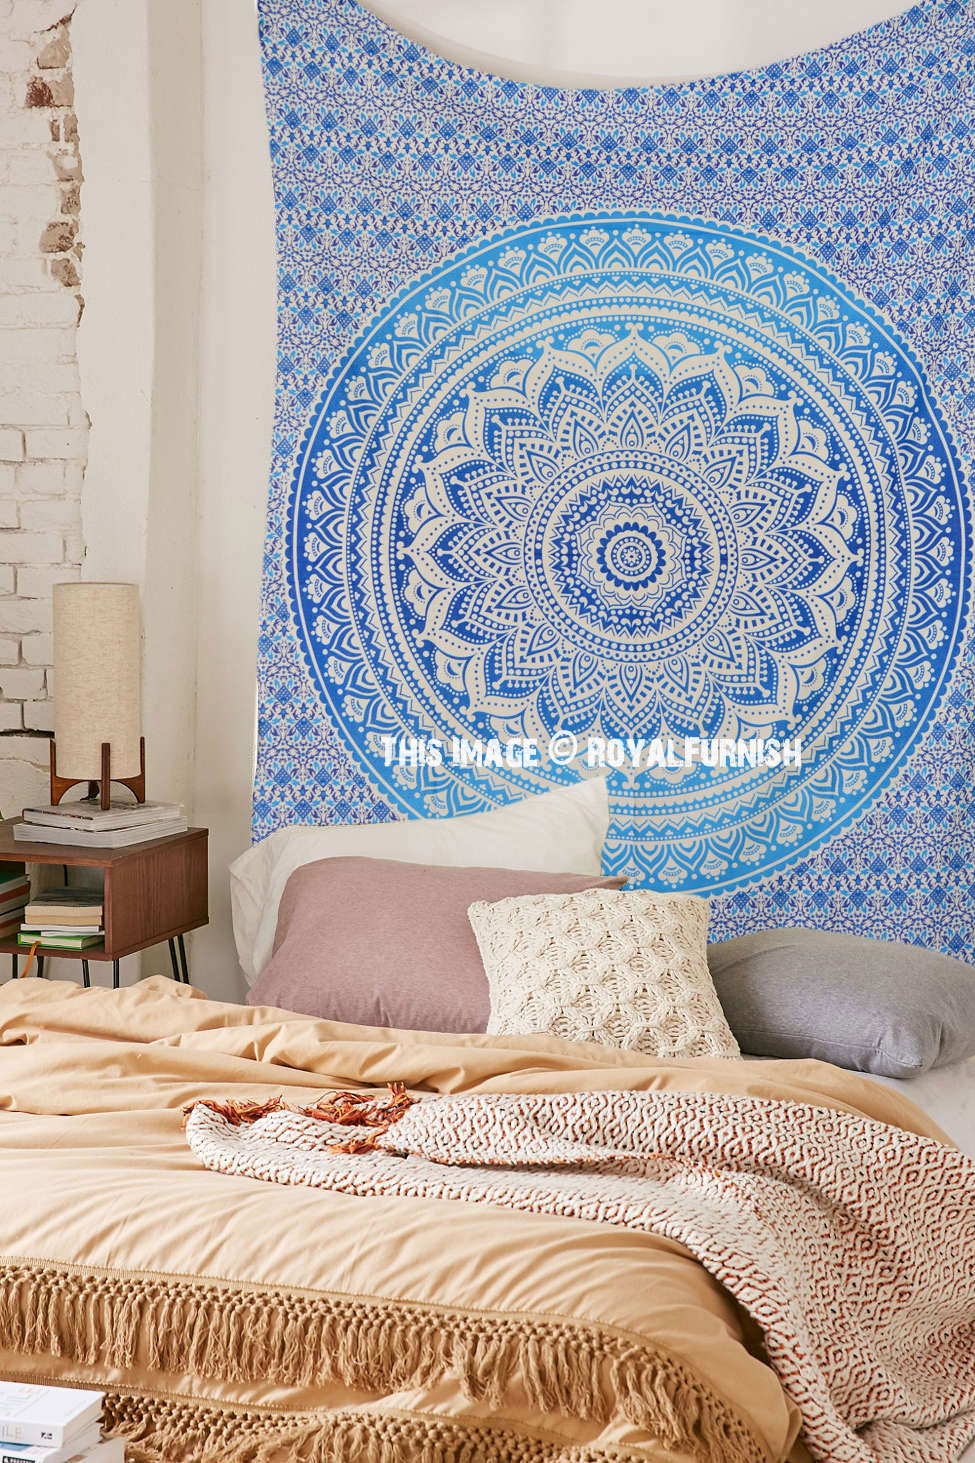 Small Blue Goddess Ombre Mandala Tapestry, Floral Wall Hanging Bedspread